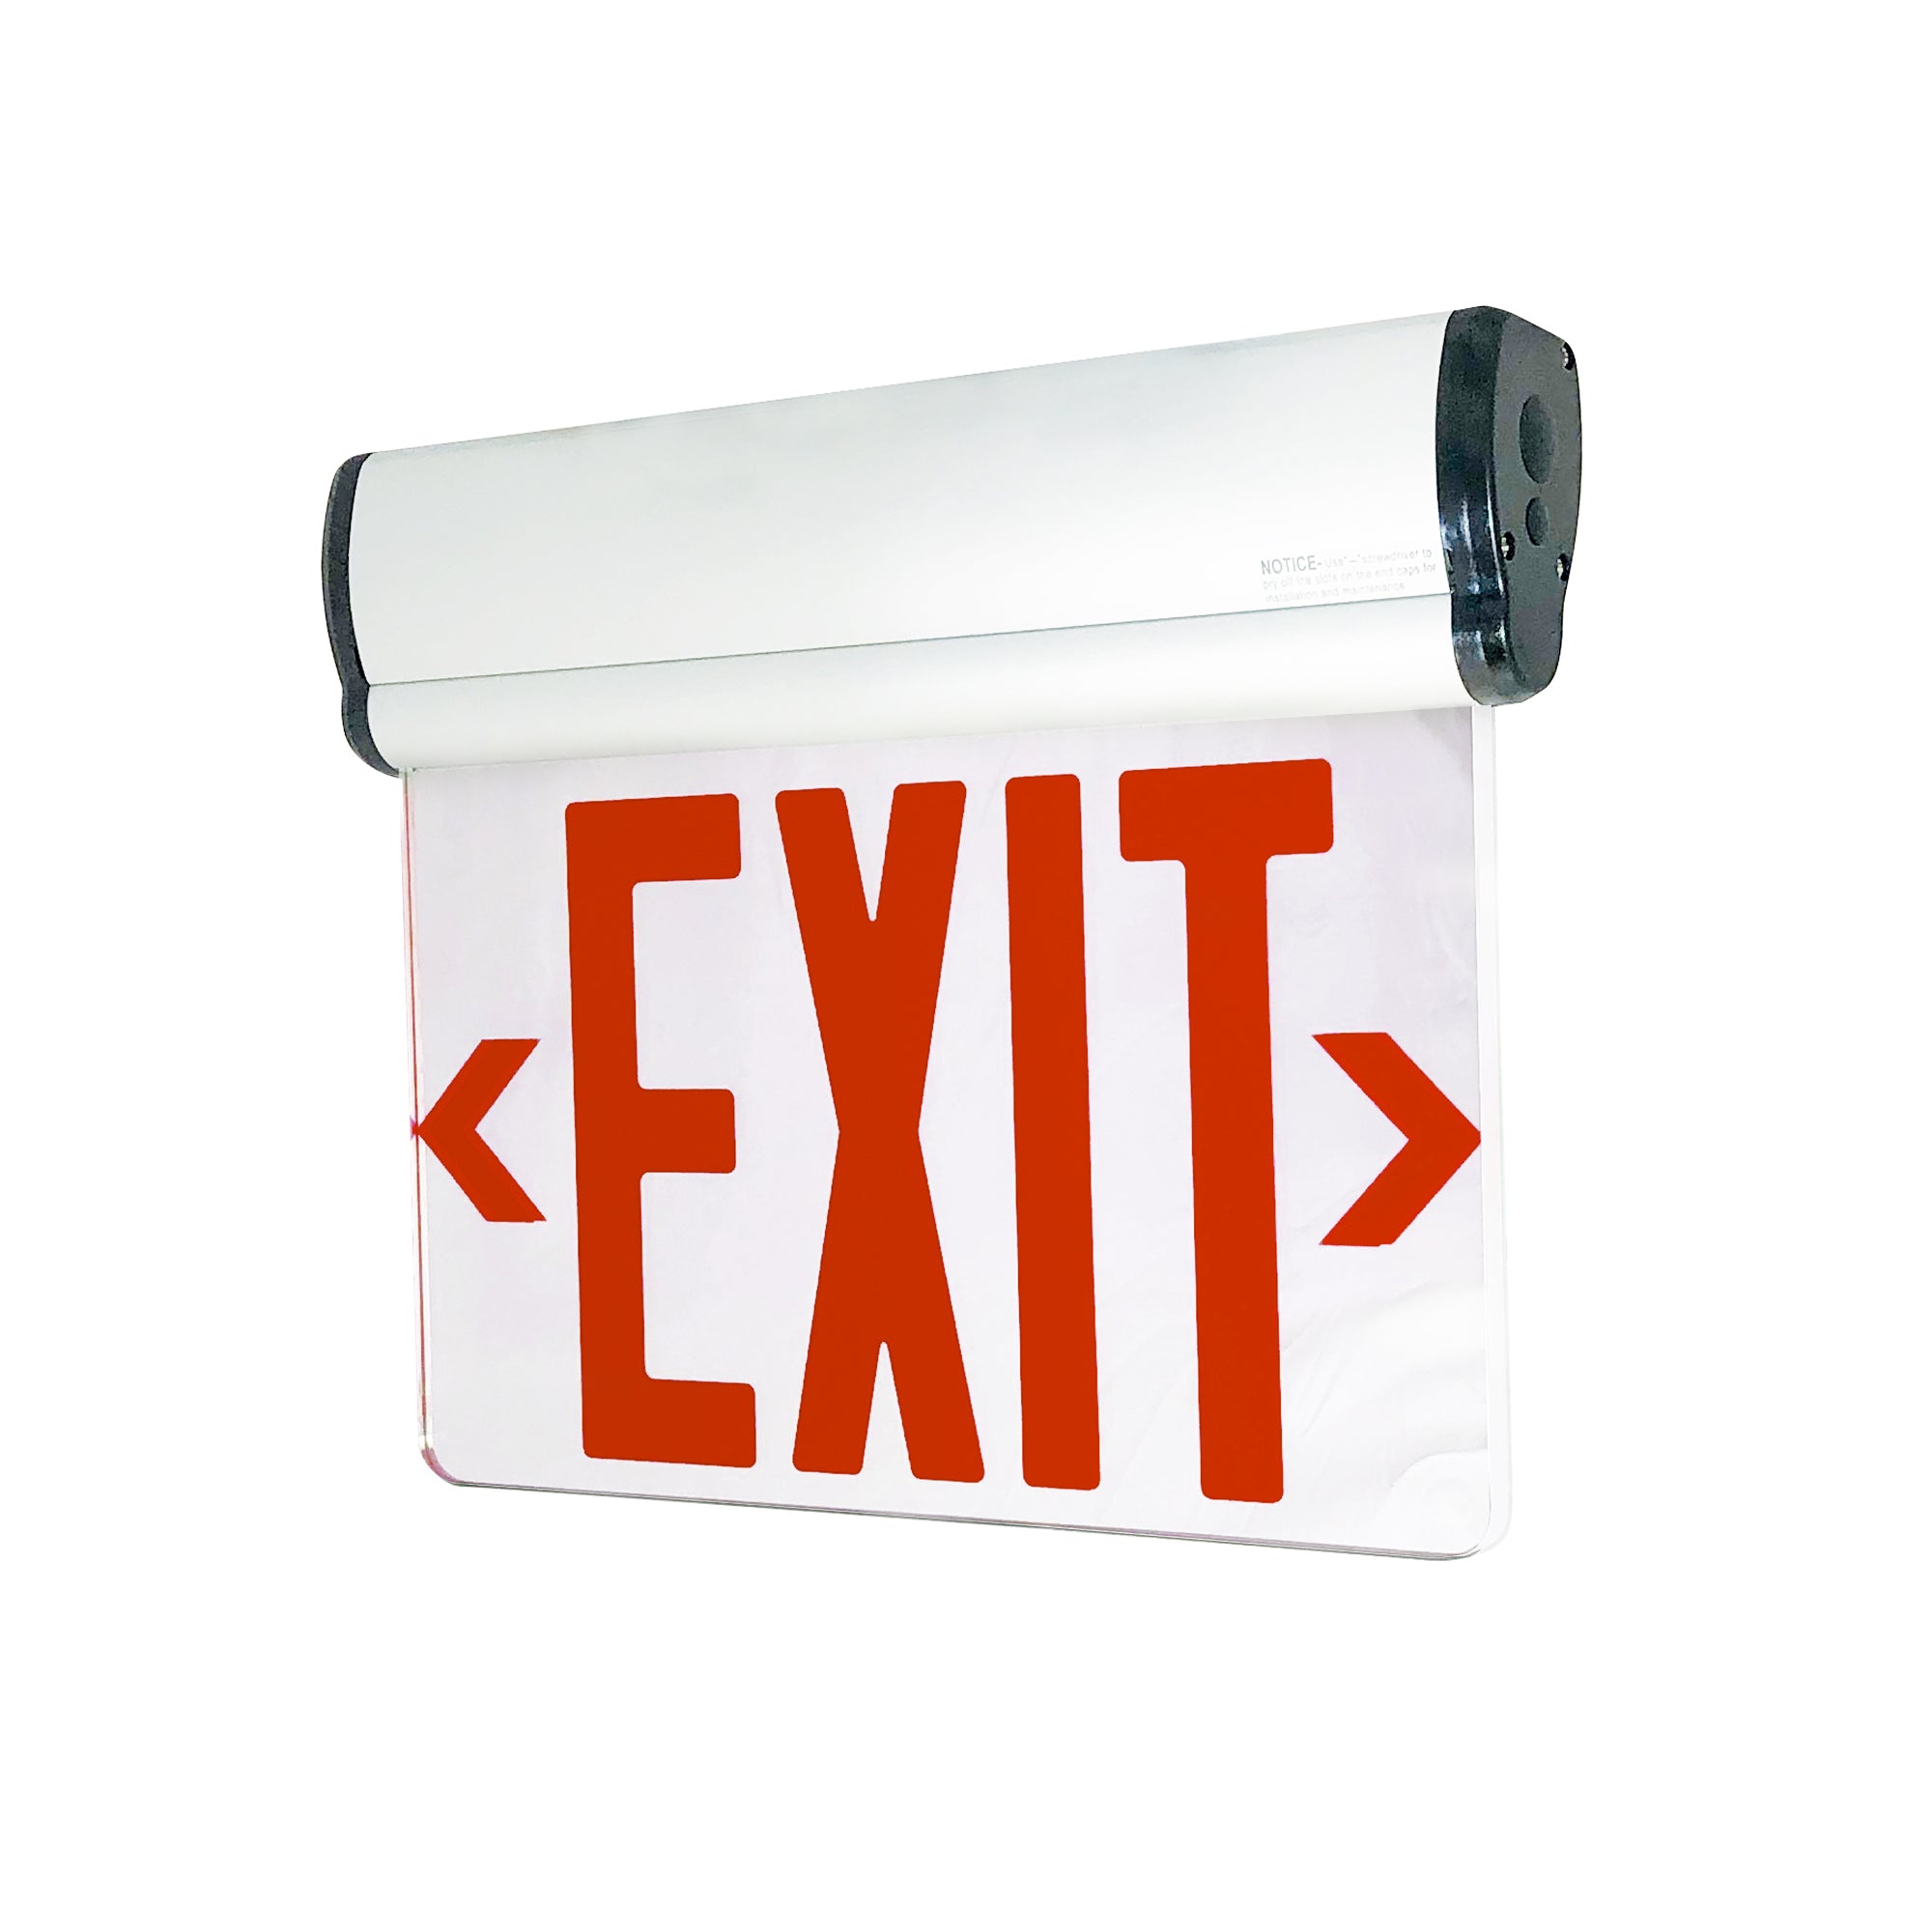 Nora Lighting NX-810-LEDR2MW - Exit / Emergency - Surface Adjustable LED Edge-Lit Exit Sign, AC Only, 6 Inch Red Letters, Double Face / Mirrored Acrylic, White Housing